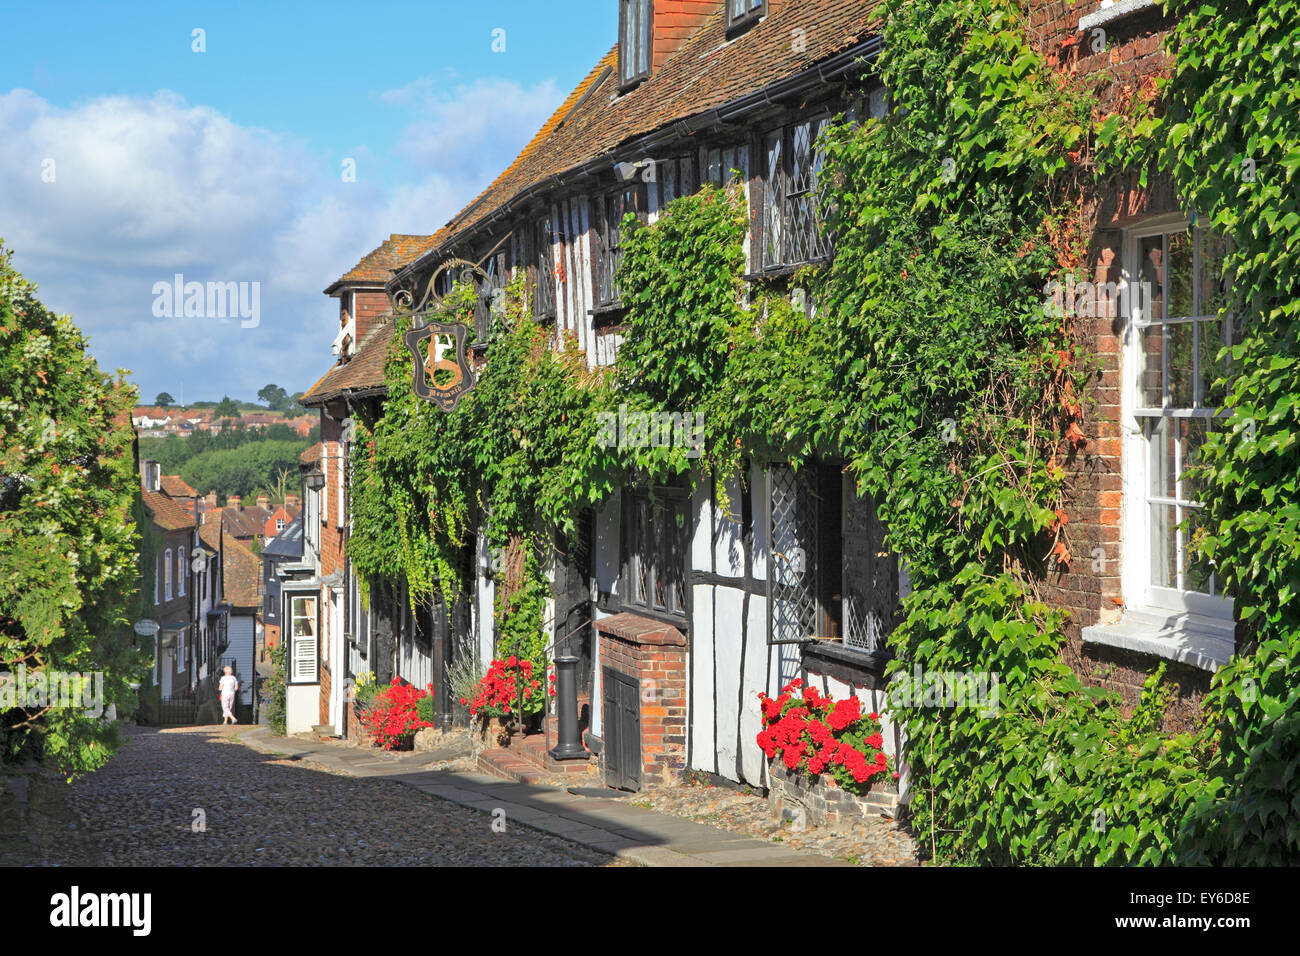 Rye, East Sussex.The historic ivy clad 15th Century Mermaid Inn, associated with smuggling in days gone by, Mermaid Street, Rye, Sussex, England UK GB Stock Photo